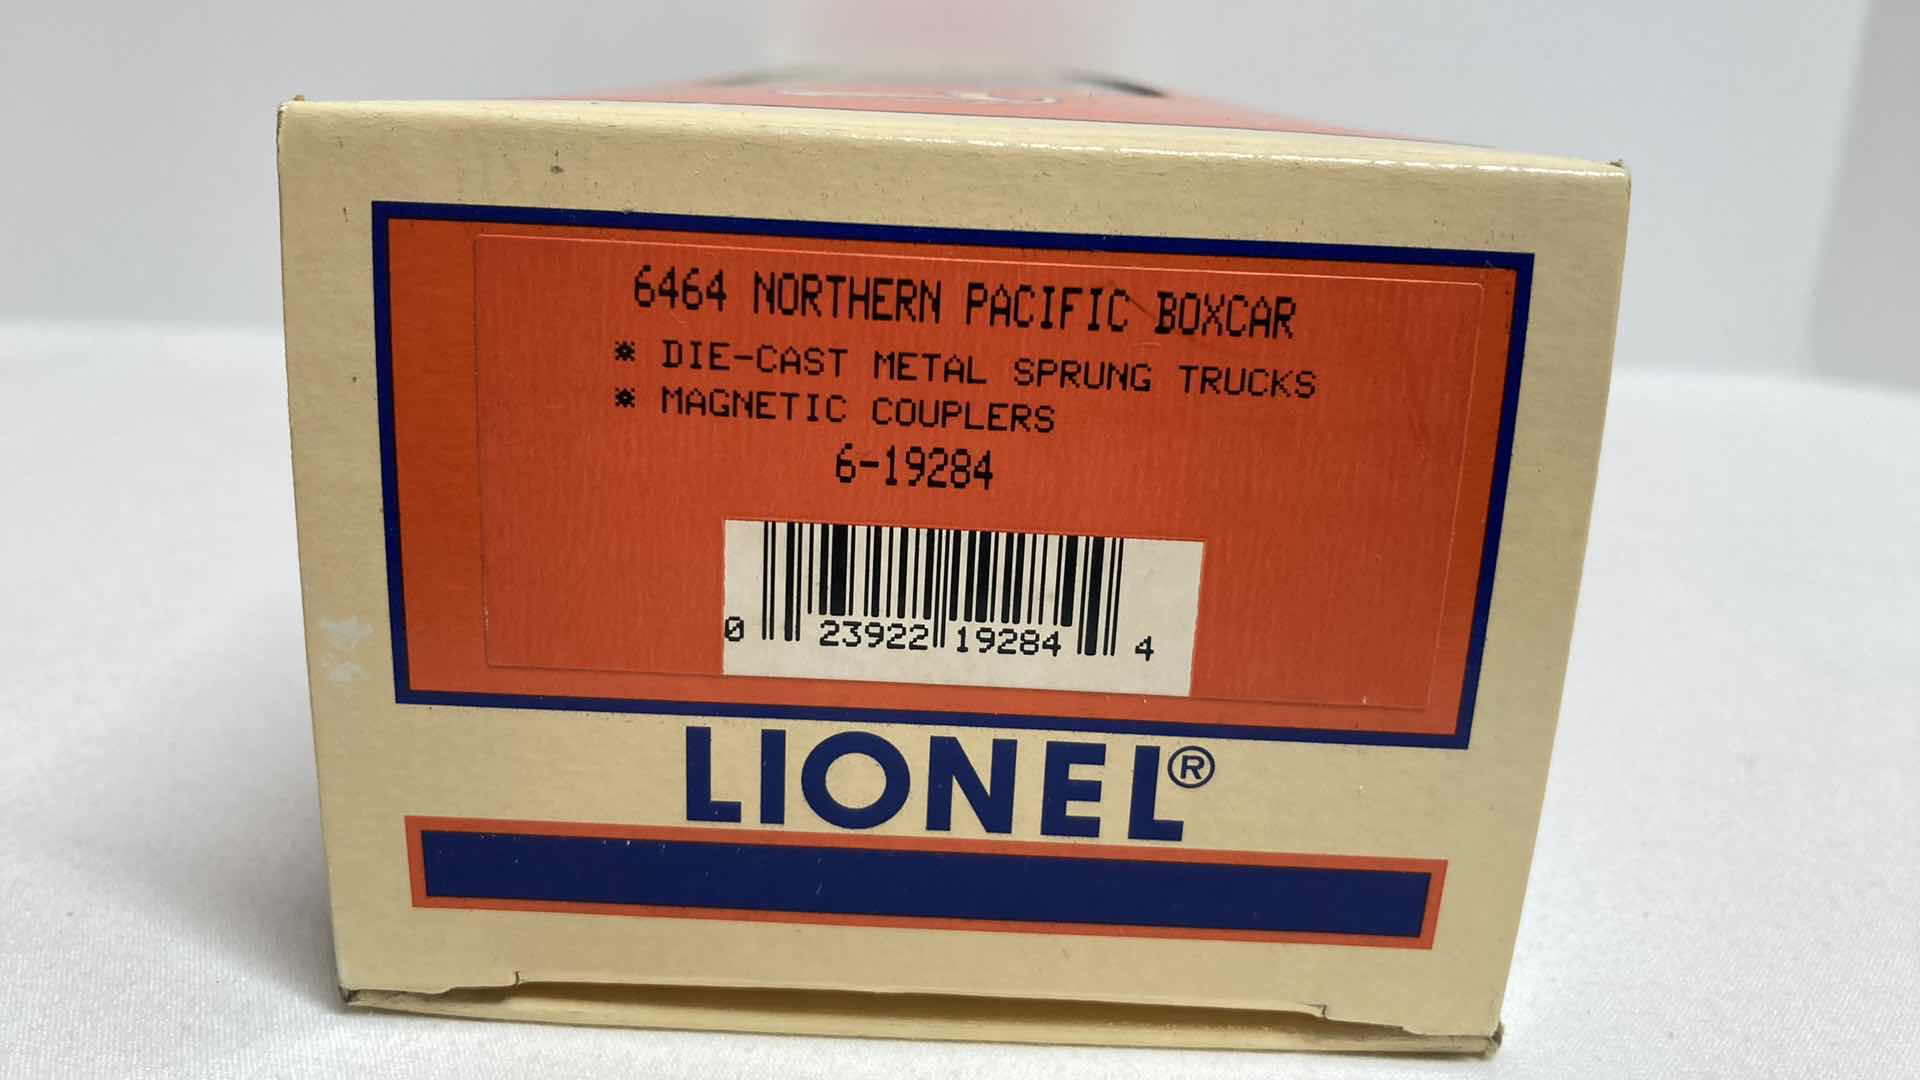 Photo 3 of LIONEL ELECTRIC TRAINS 6464 NORTHERN PACIFIC 6-19284 BOX CAR